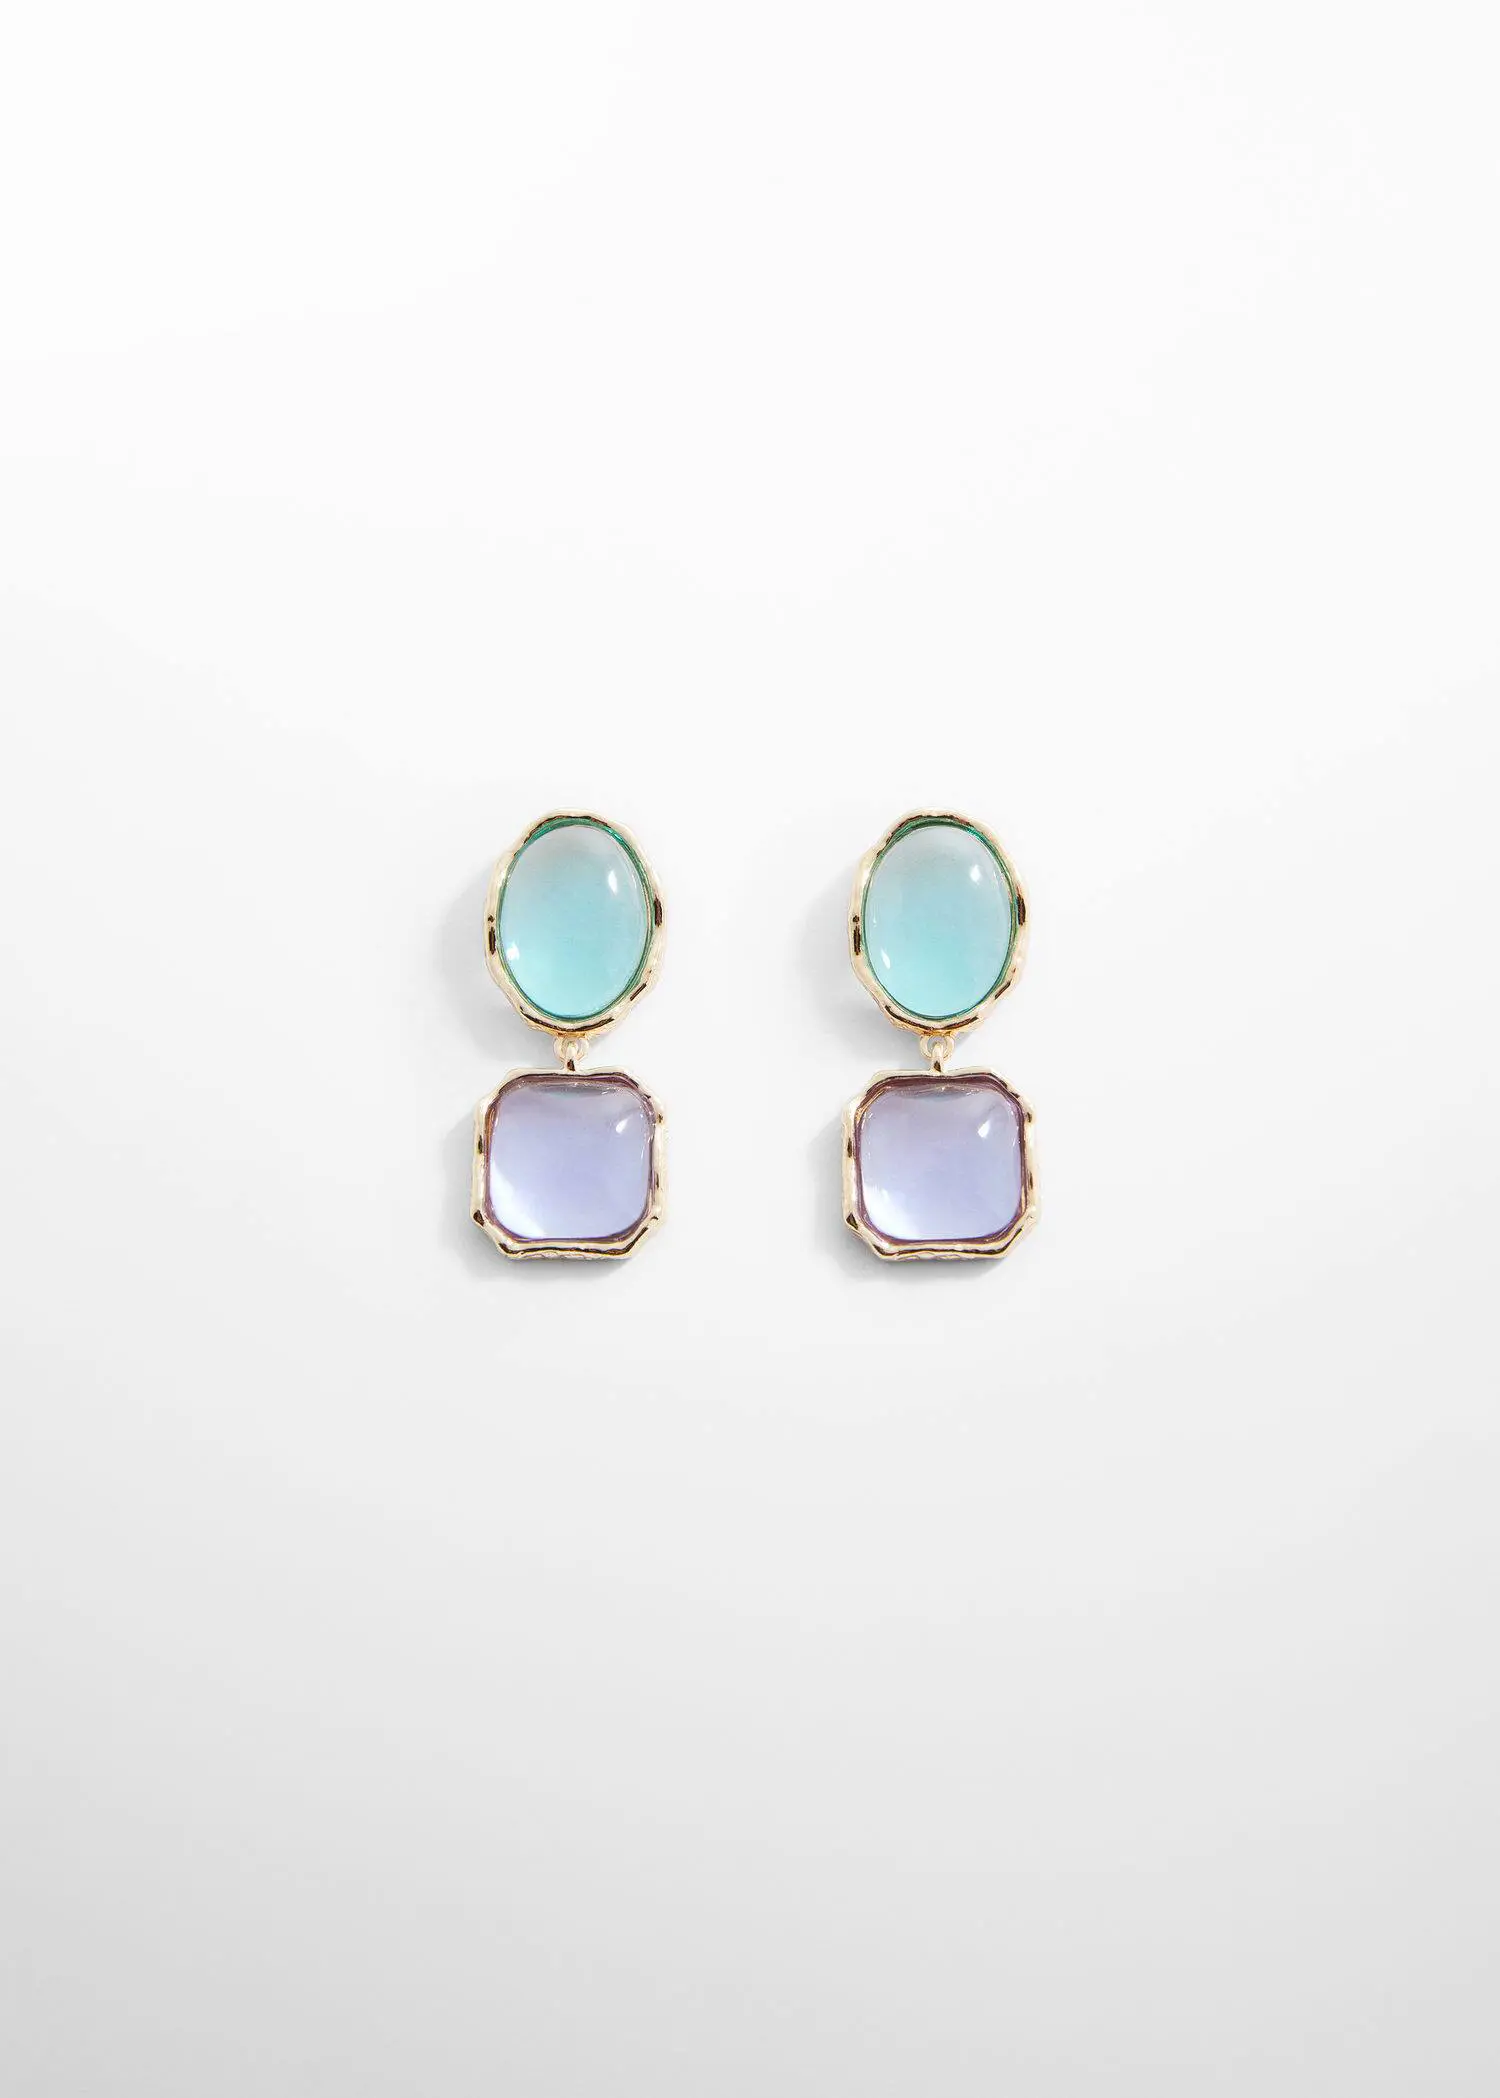 Mango Combined stones earrings. a pair of blue and purple earrings on a white surface. 